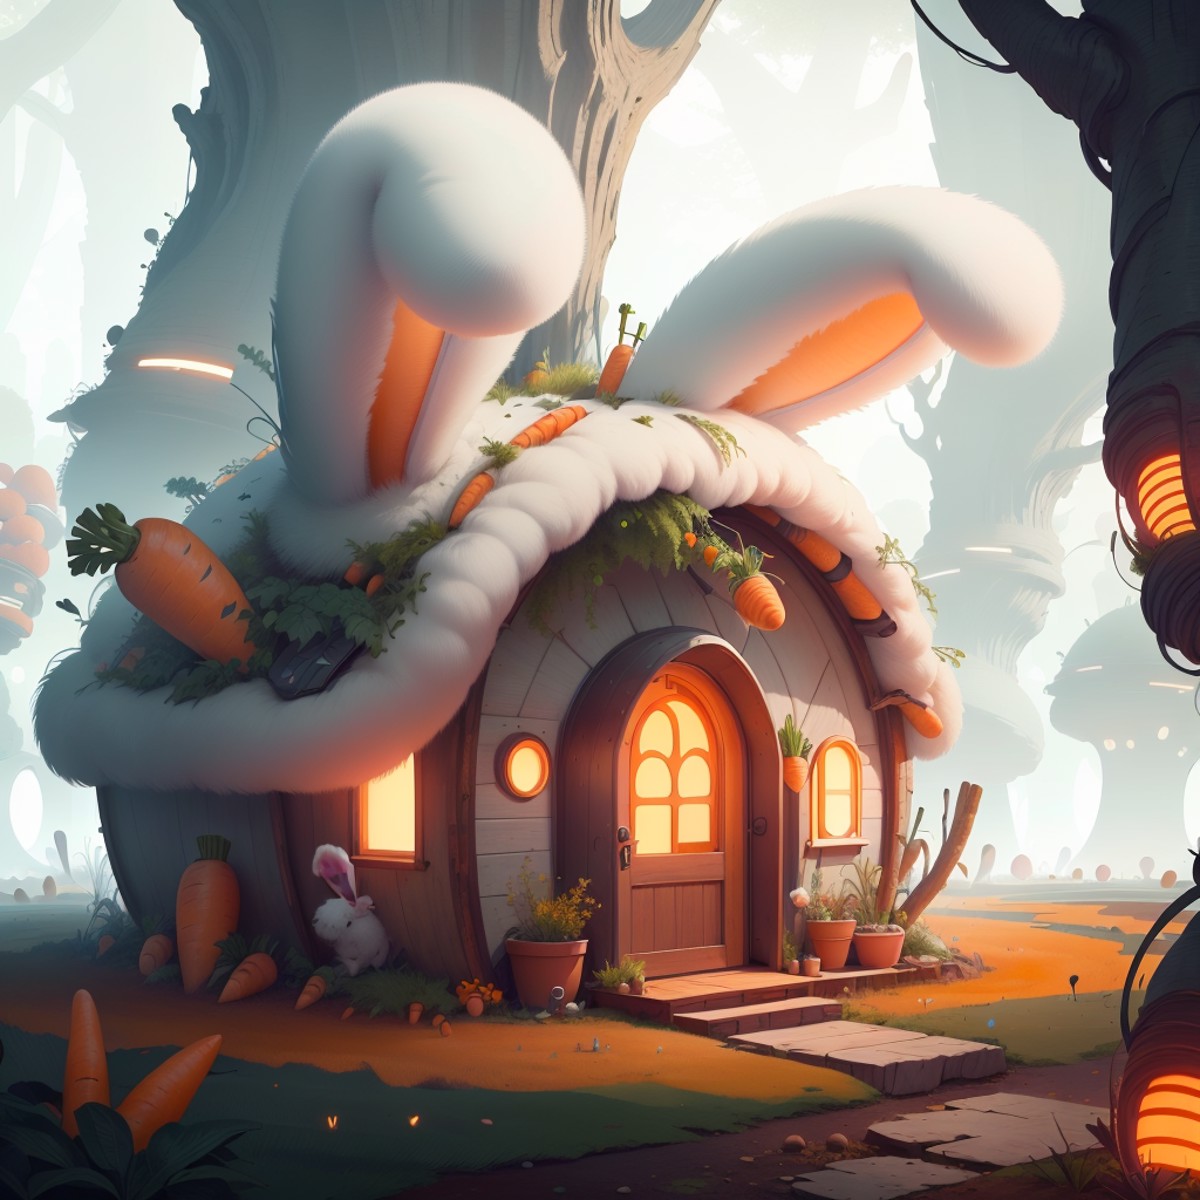 10565-285134877-,bunnytech , fluffy , carrots, scifi, _small hut in the forest.png